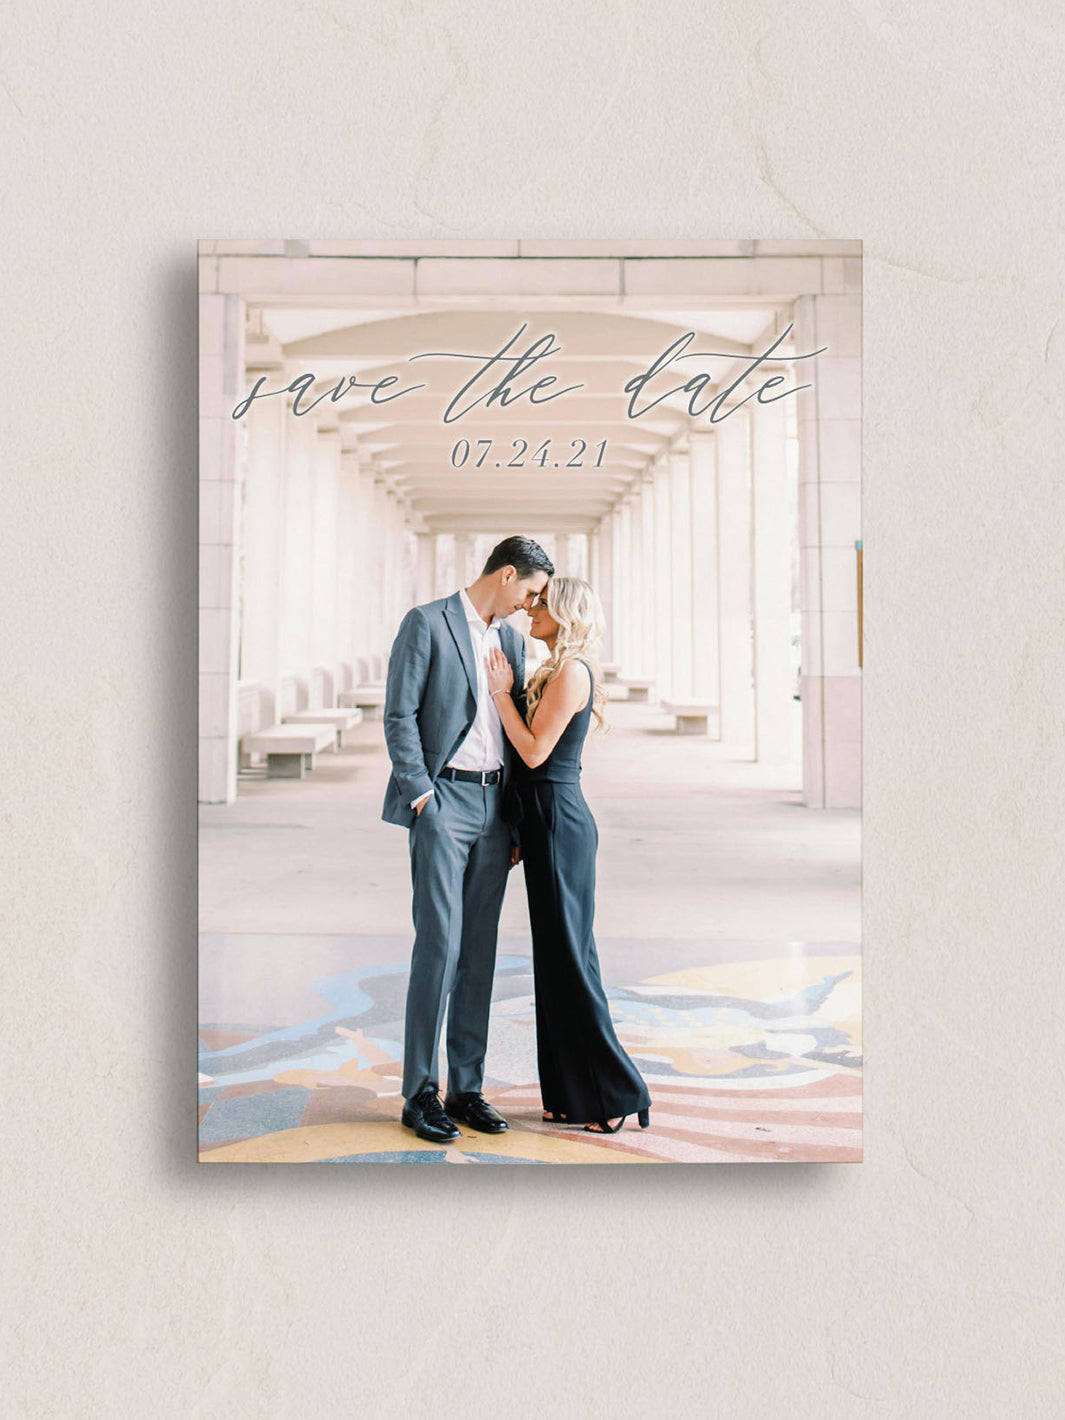 Tori Save The Dates from Leighwood Design Studio